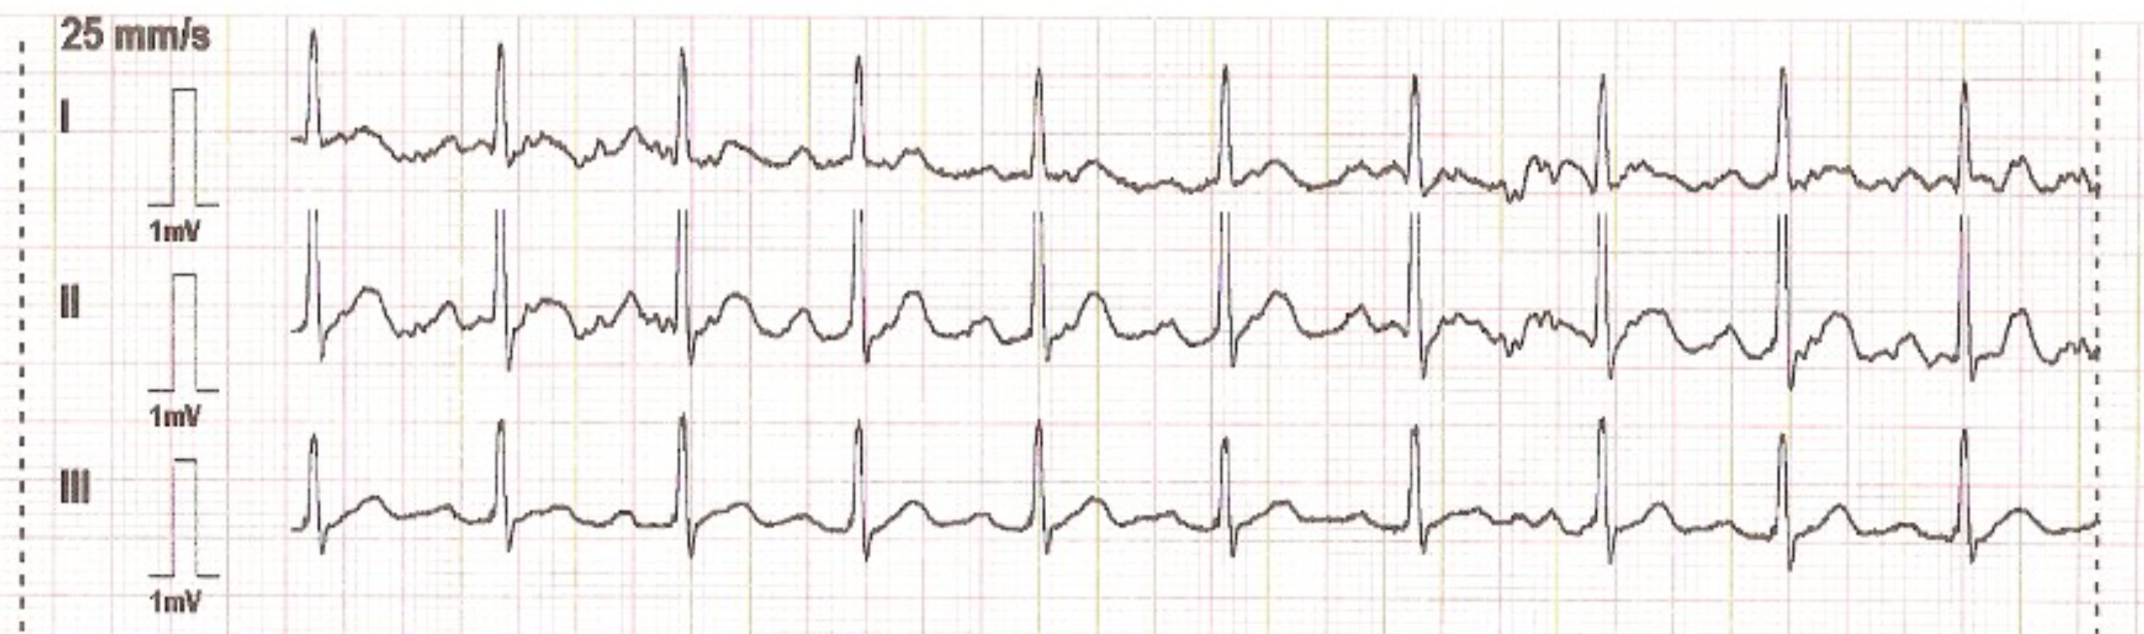 Graph showing unspecified leads of a 3-lead-ECG